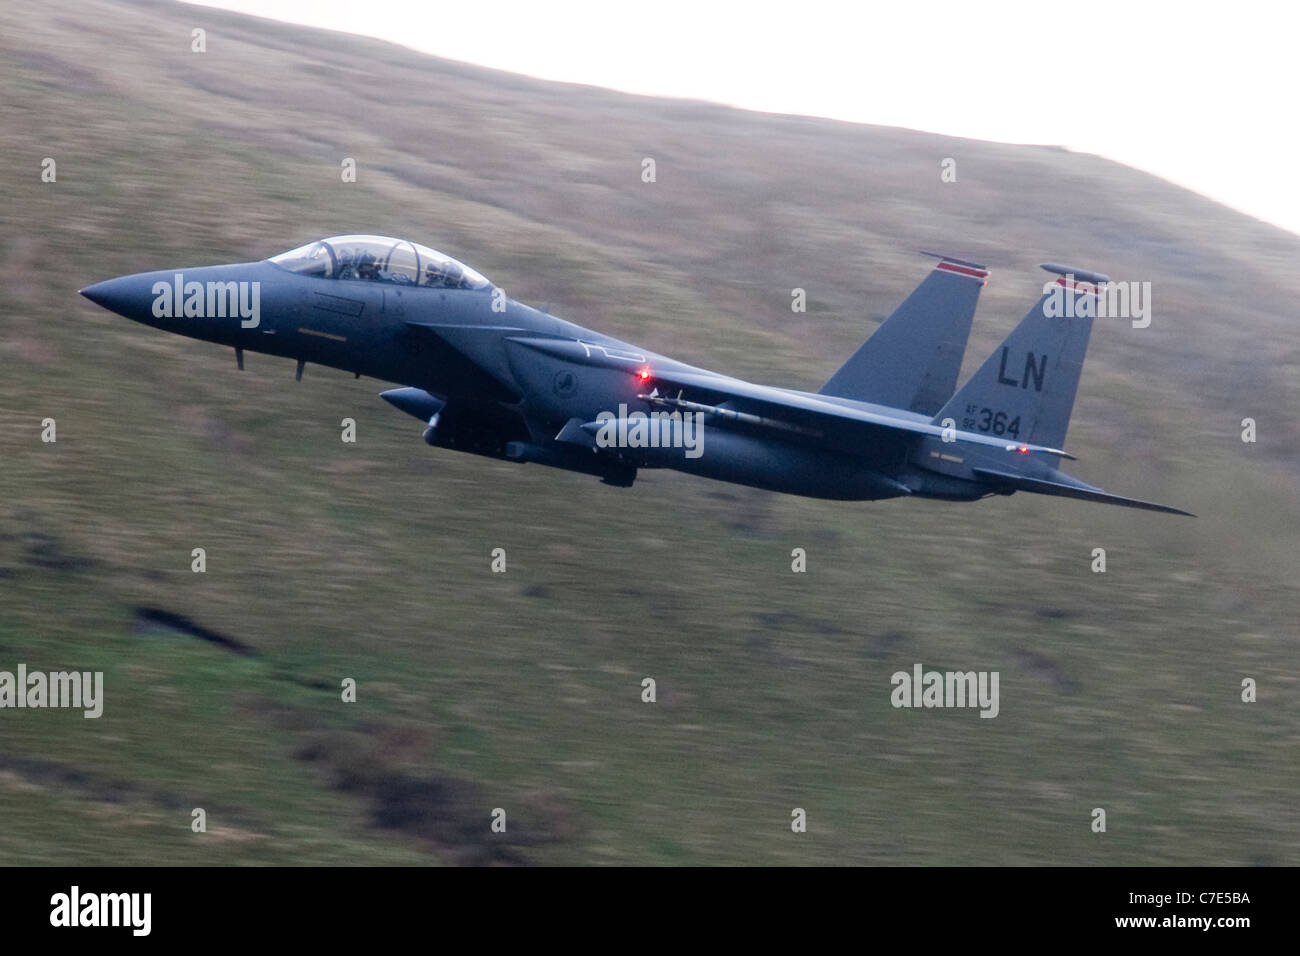 USAF F-15E Strike Eagle makes a turn mountains of Snowdonia in the background during a low flying flight Stock Photo